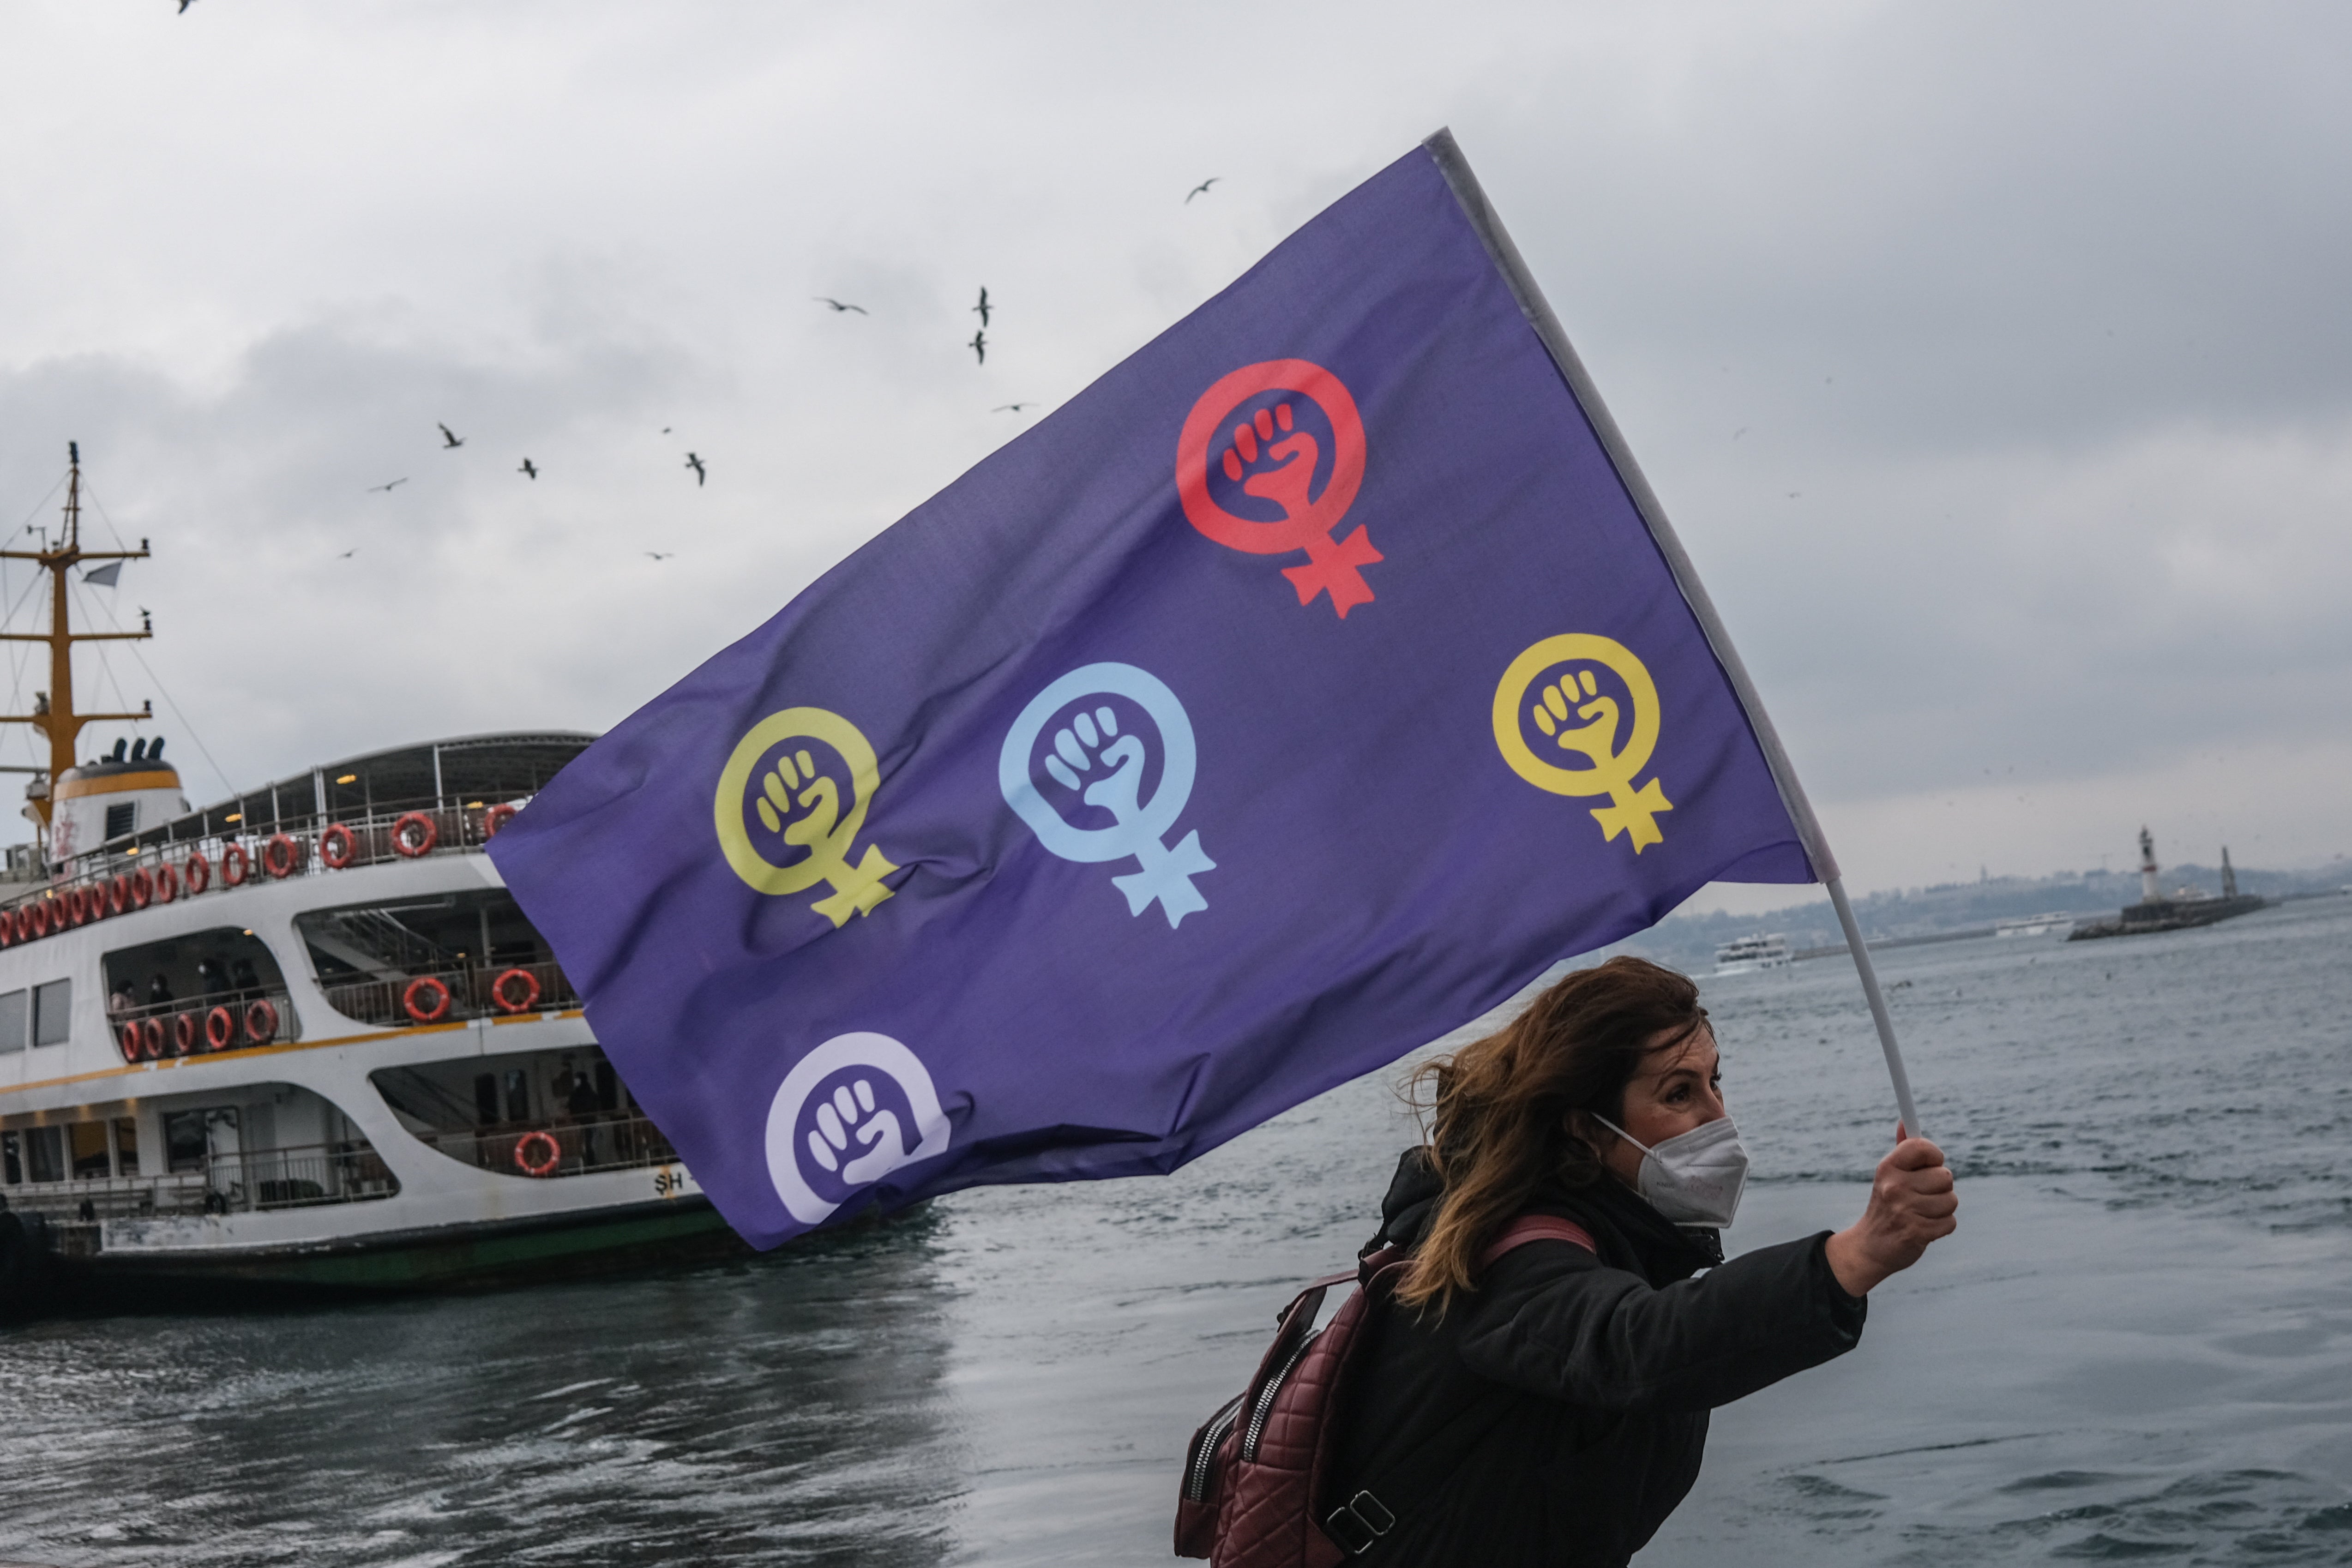  female protestor hold feminist flag and shout slogans during demonstration on the occasion of the International Day for the Elimination of Violence Against Women in Istanbul at the weekend